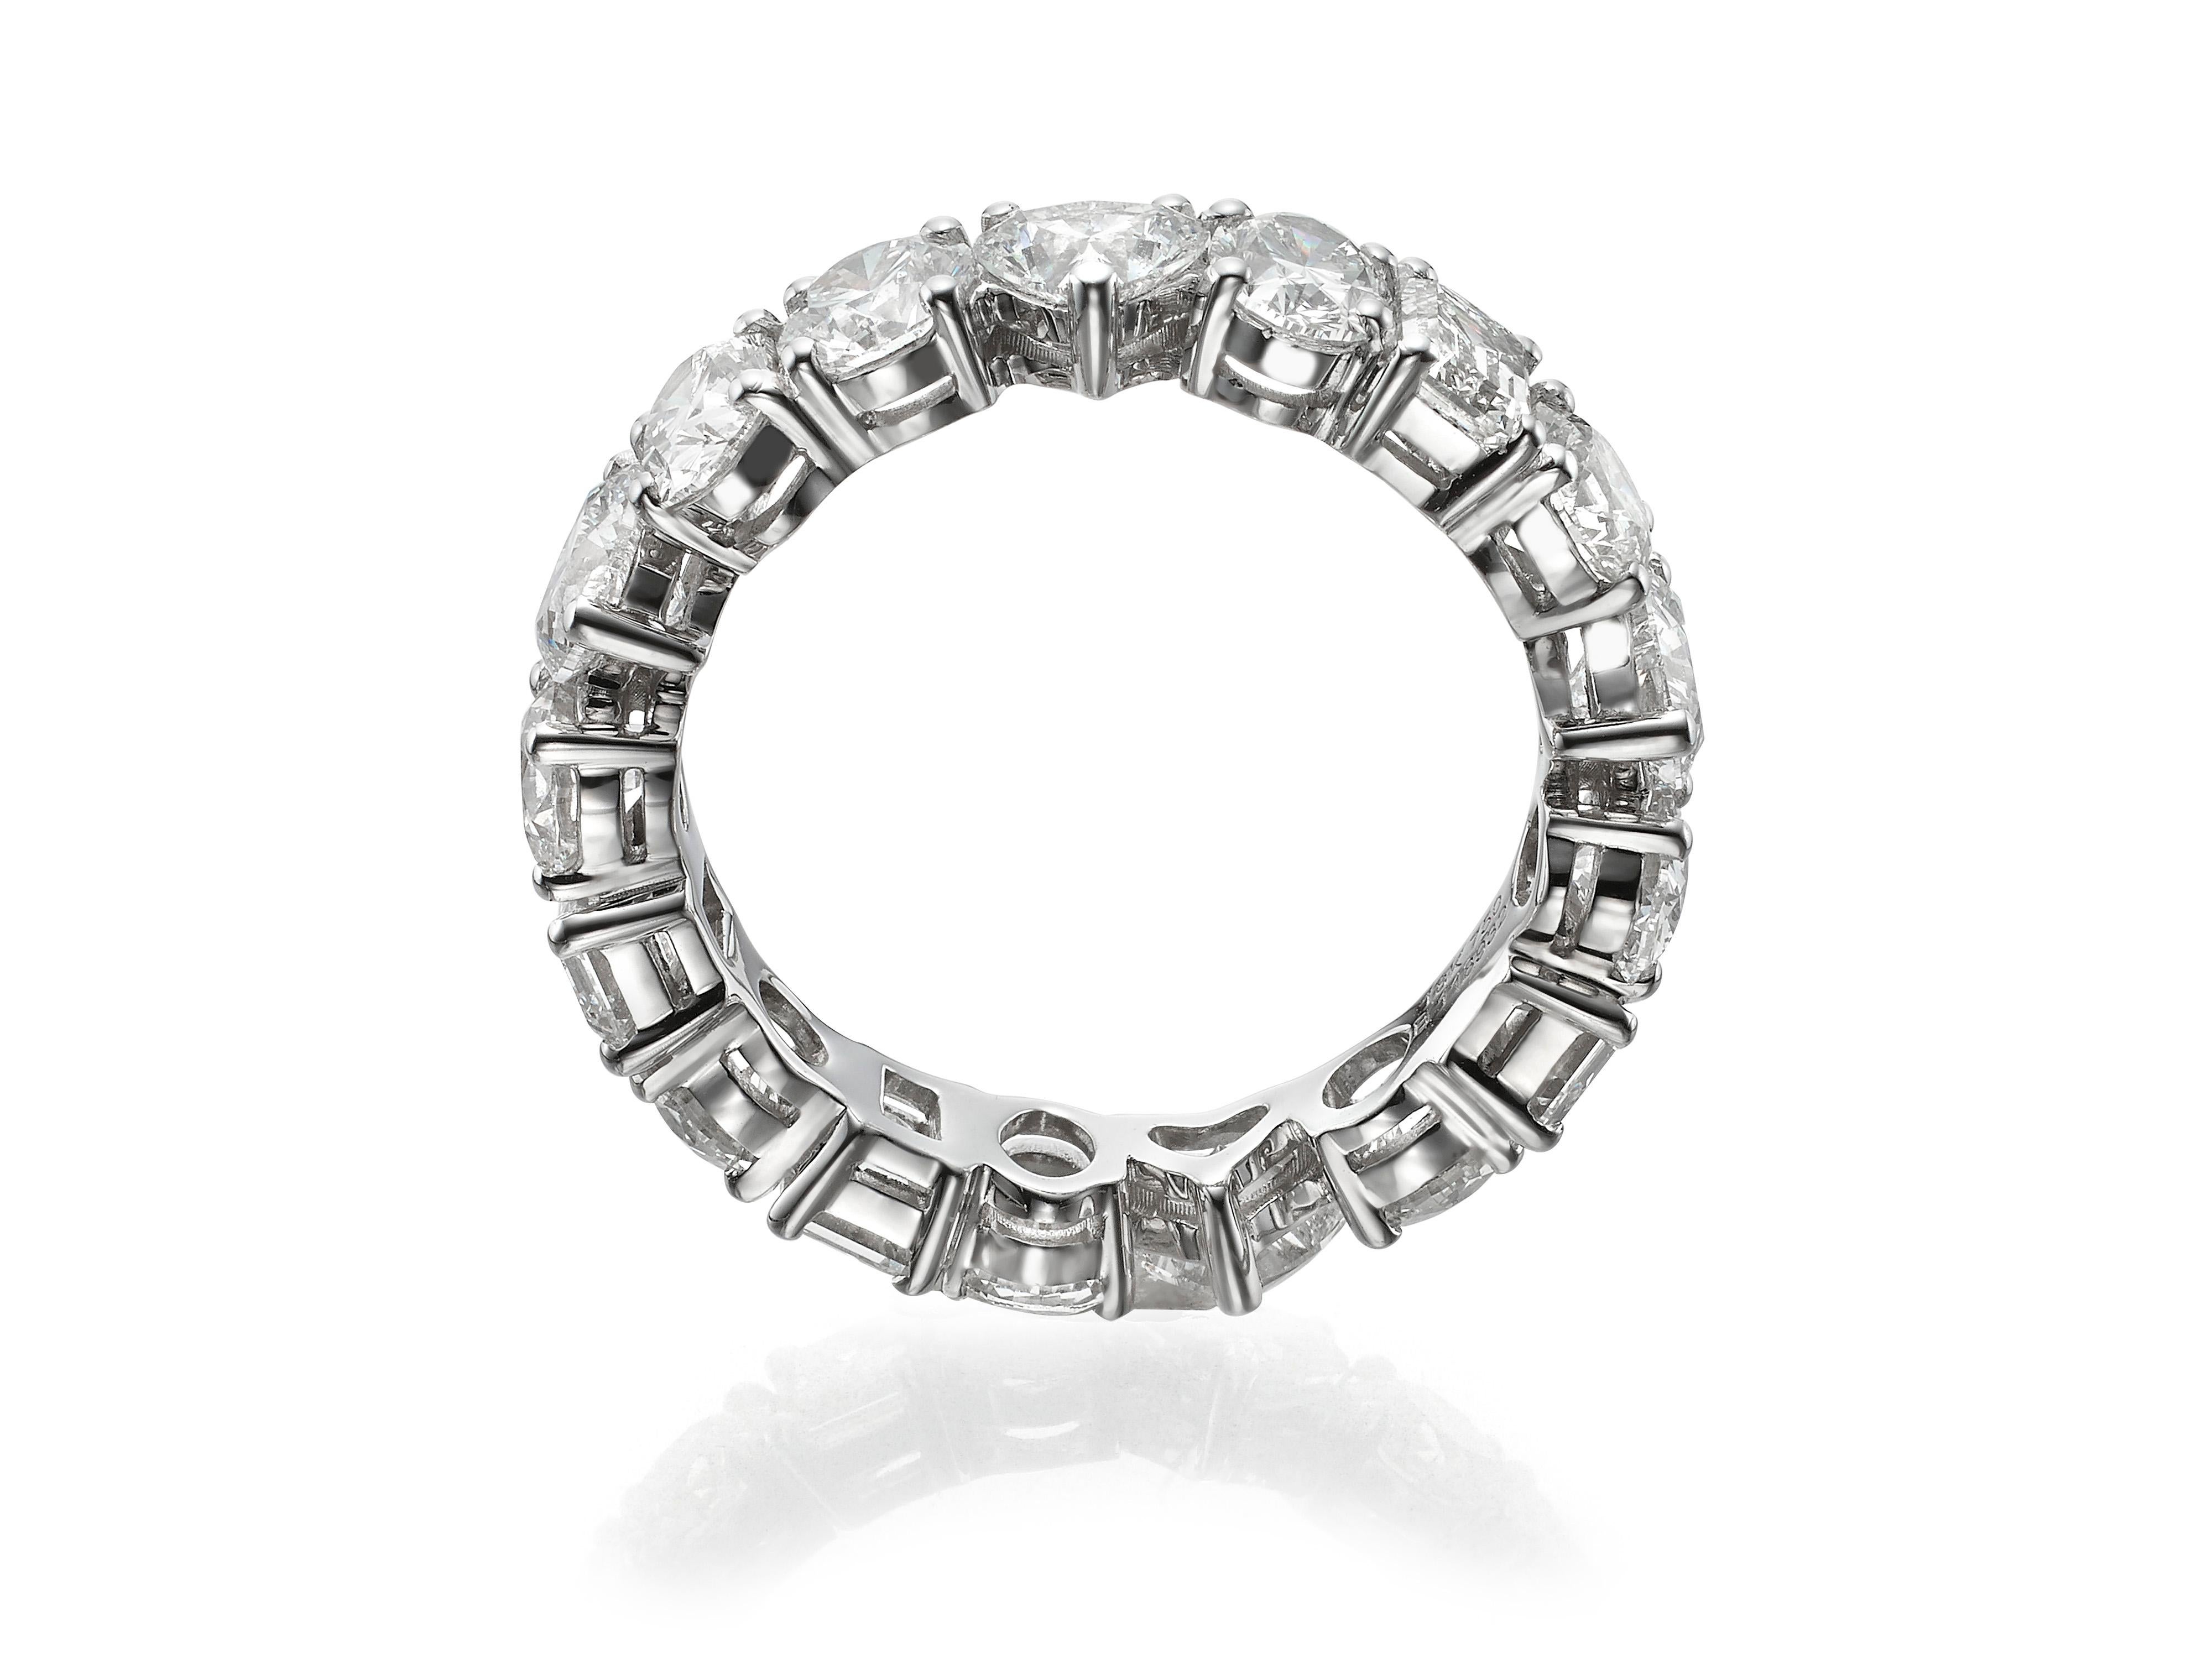 Butani's 5.30 carat multi shape diamond eternity band ring features 17 fancy cut diamonds including round brilliant, emerald, heart, and oval.  Perfect as a bridal piece worn with an engagement ring or alone as a statement.  Each diamond is